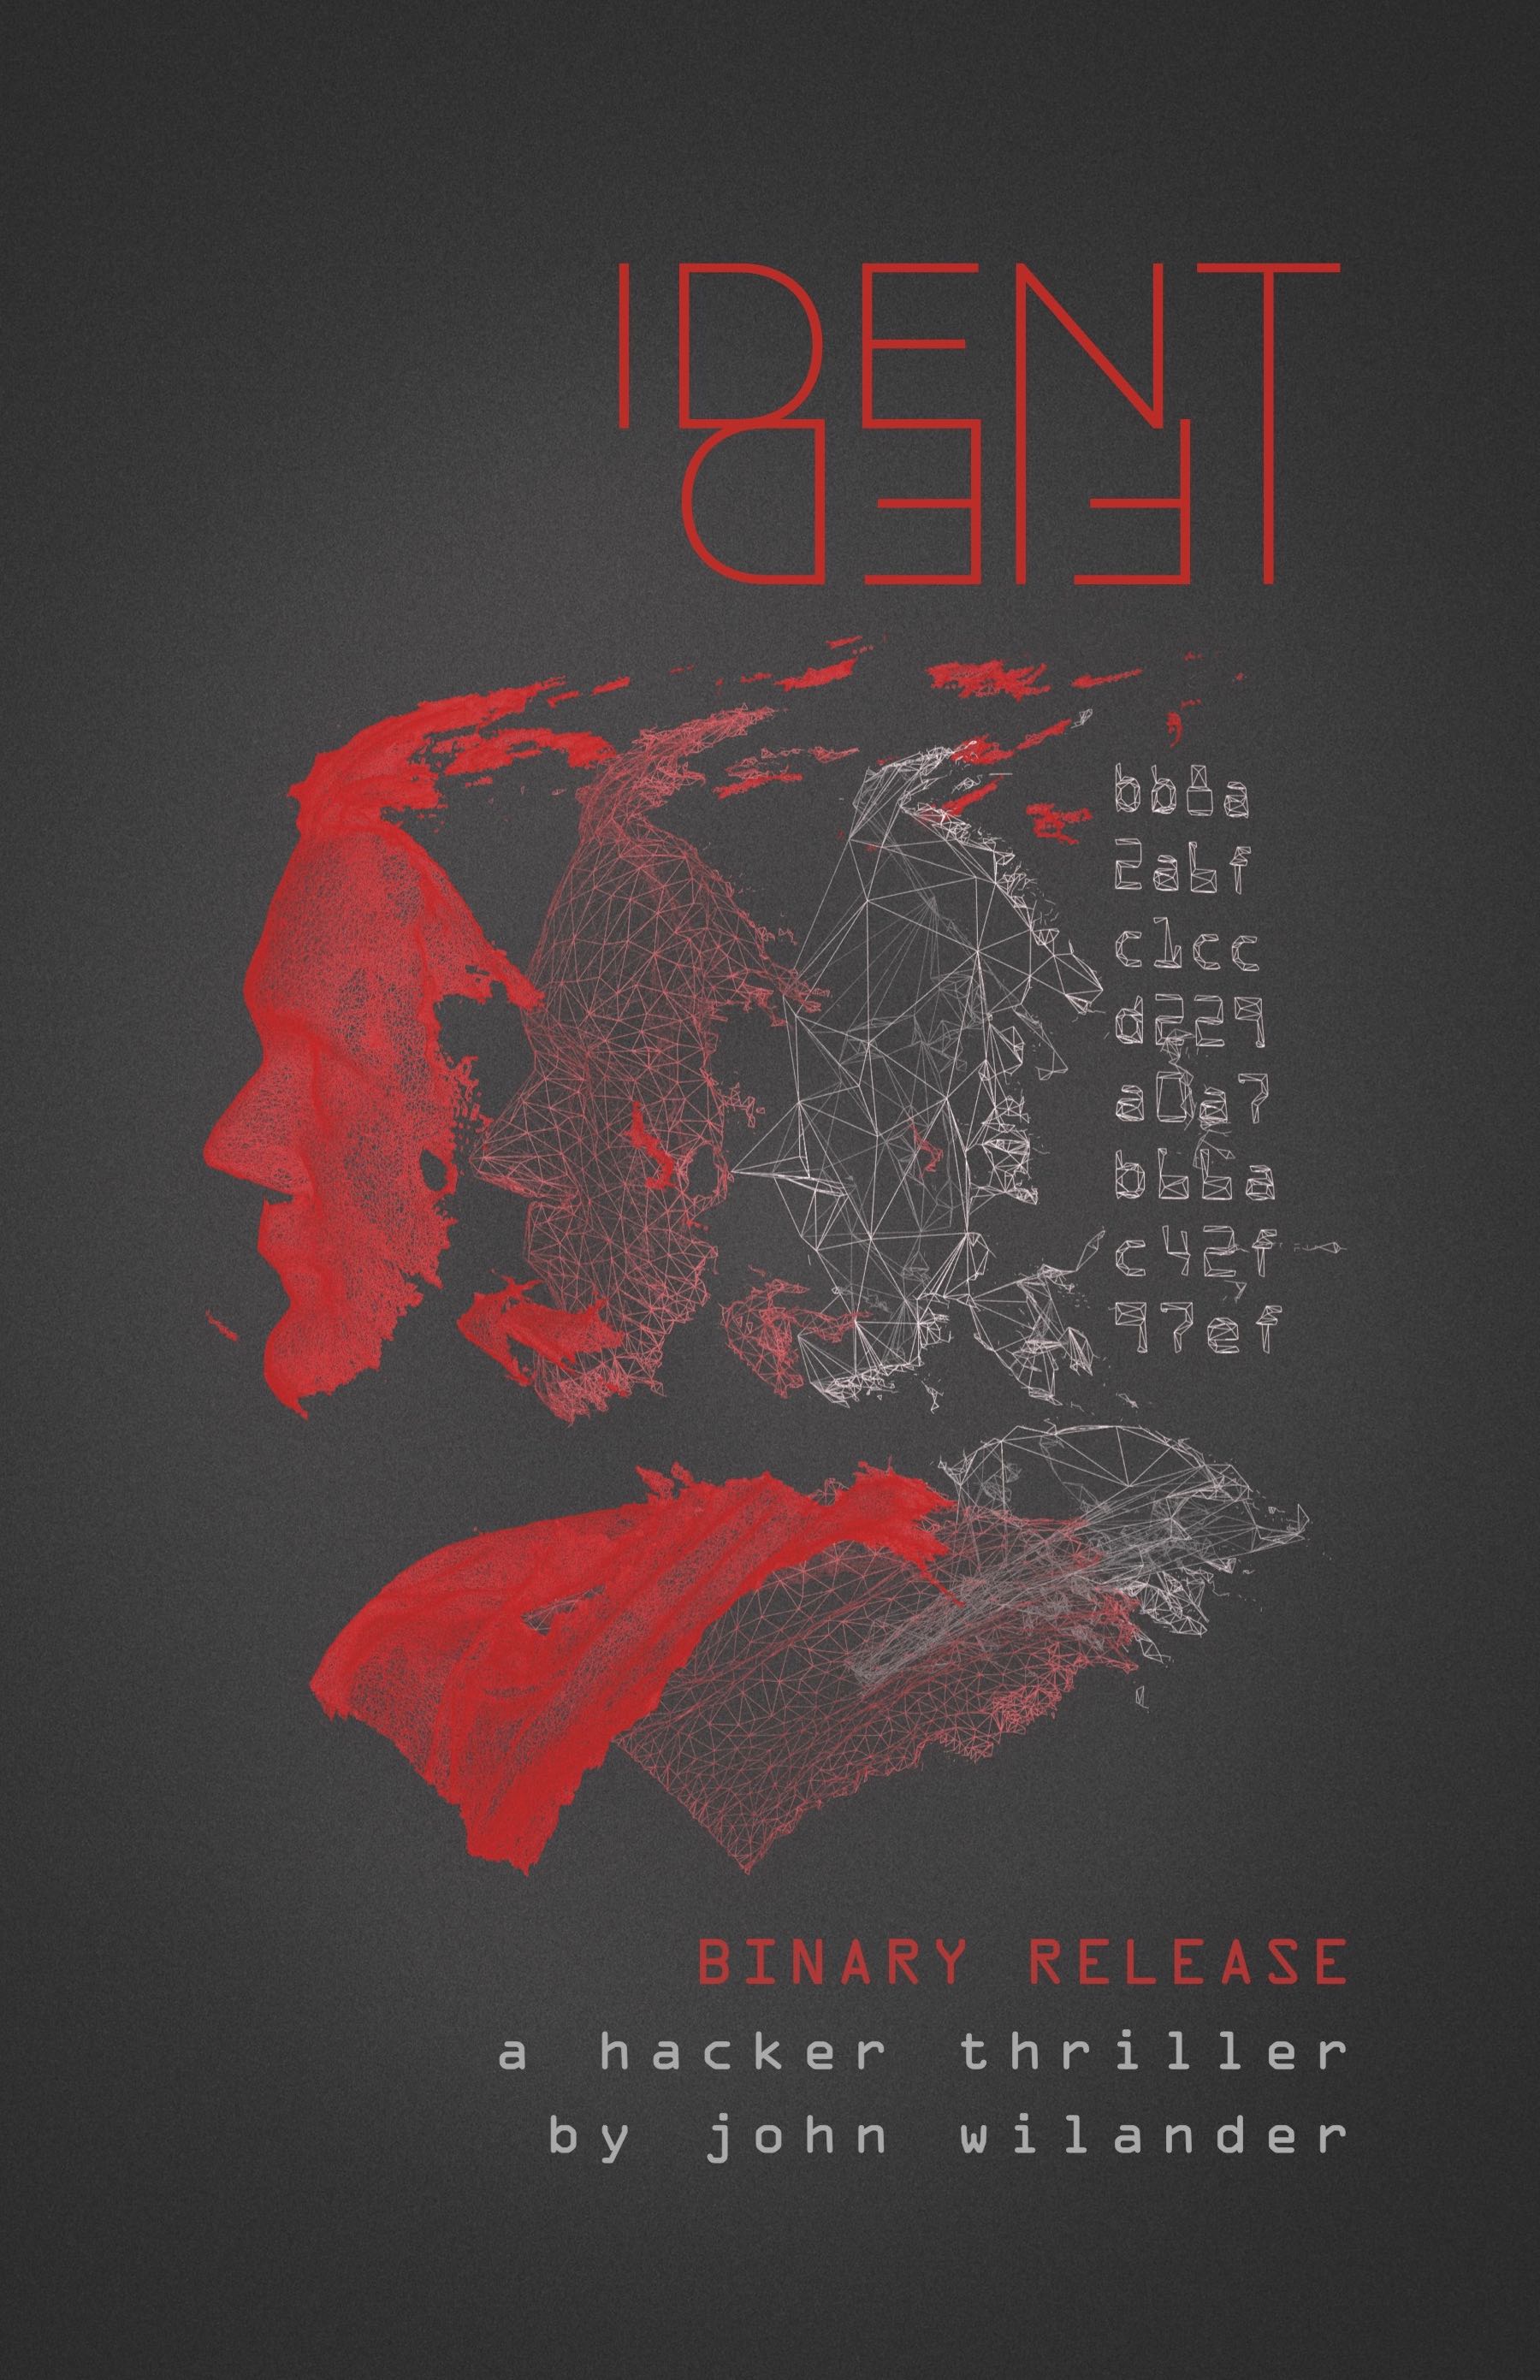 A mock book lying down at an angle with a cover looking as follows - dark gray background, a stylized title Identified at the top, a facial recognition model in four stages going from refined to vectorized to a single user ID, and the text Exclusive Binary Release, a hacker thriller by John Wilander.